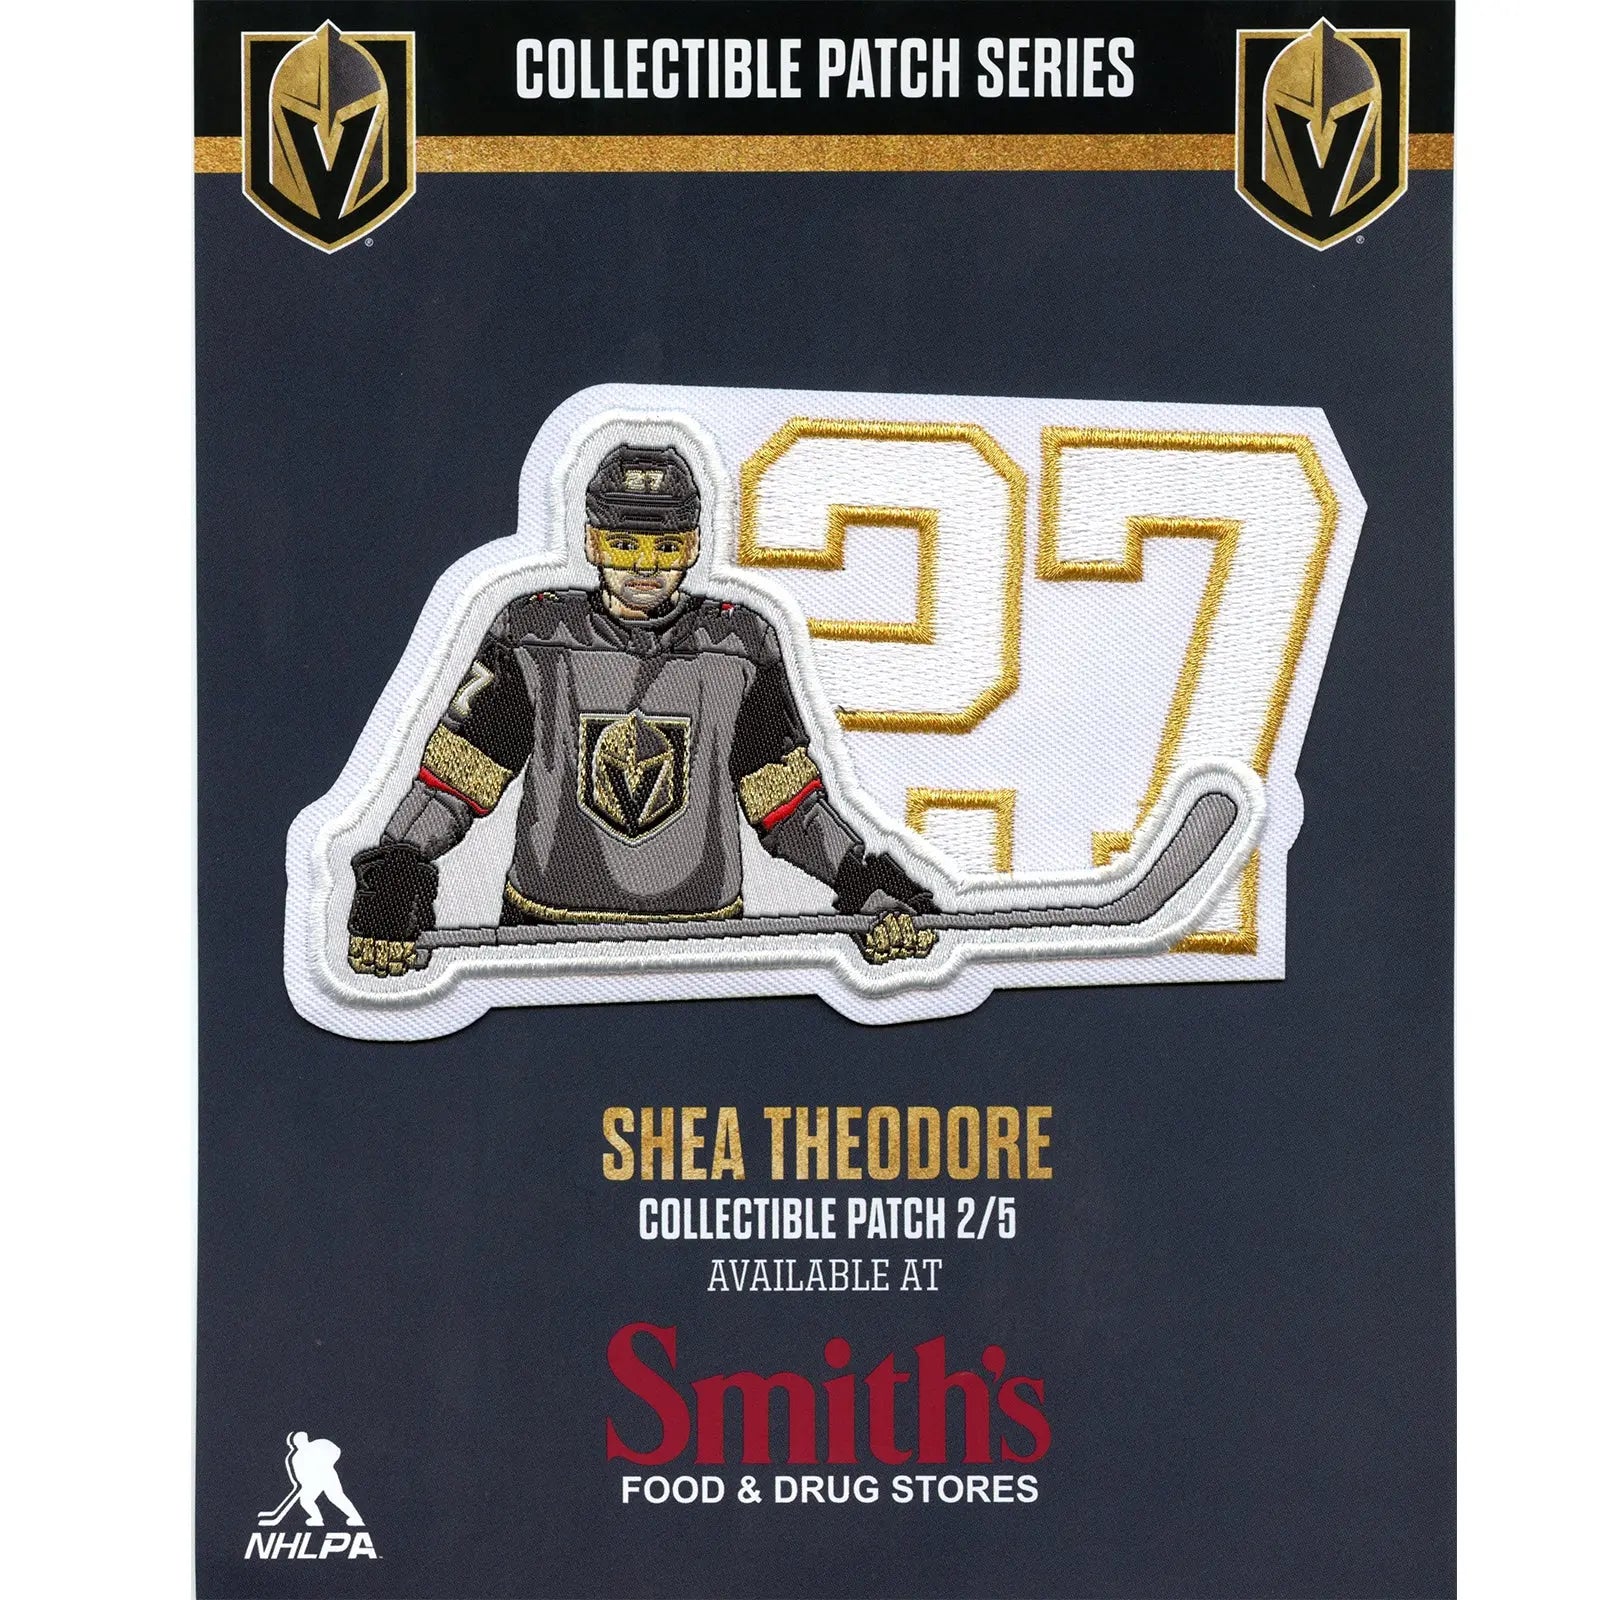 Las Vegas Golden Knights Shea Theodore #27 NHL Patch 1 of 5 (2nd Series) 